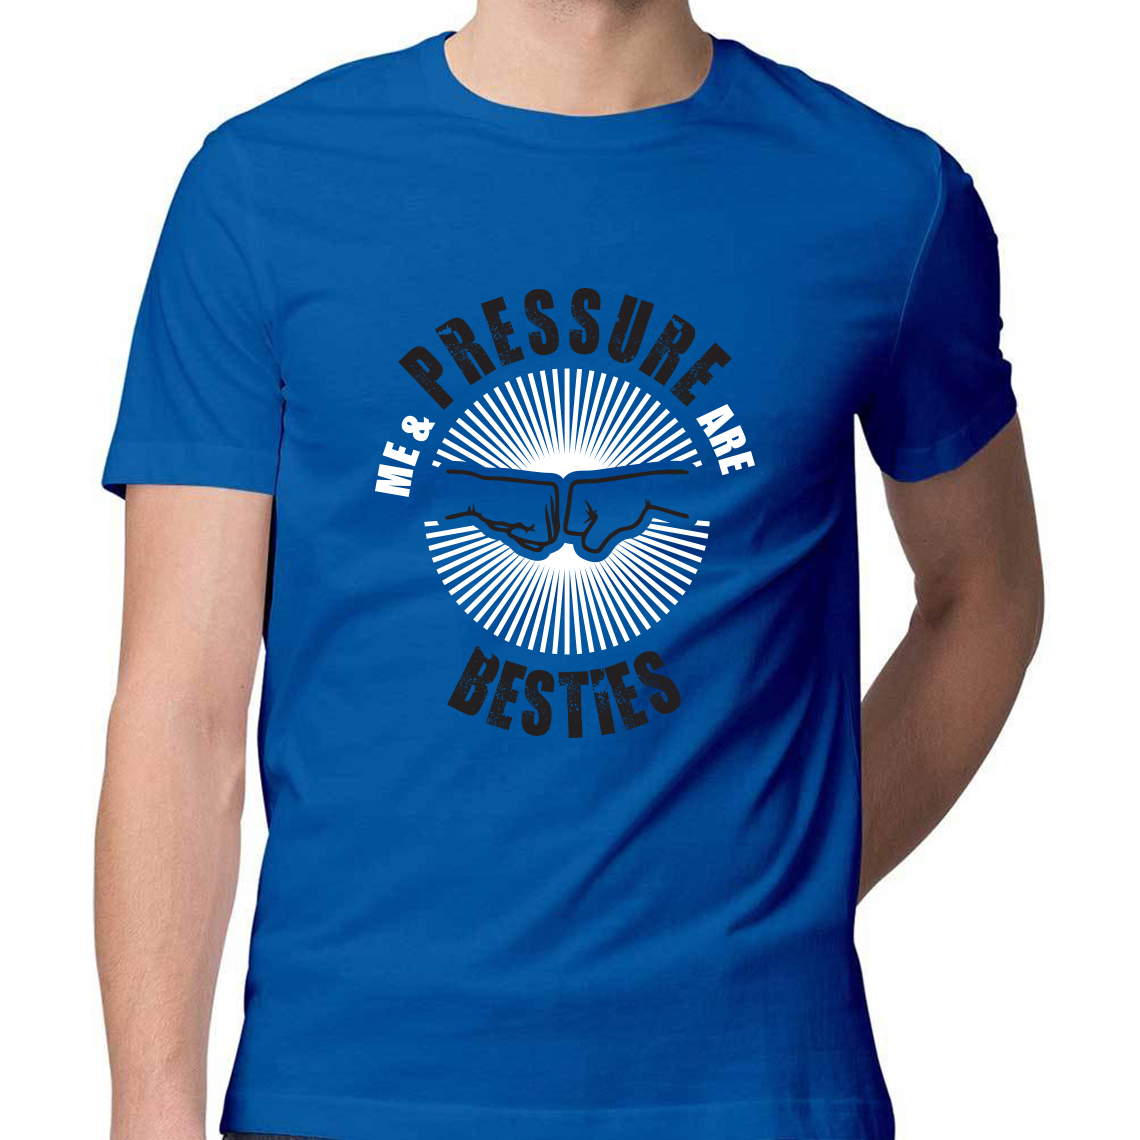 t shirt design for me and pressure are the besties